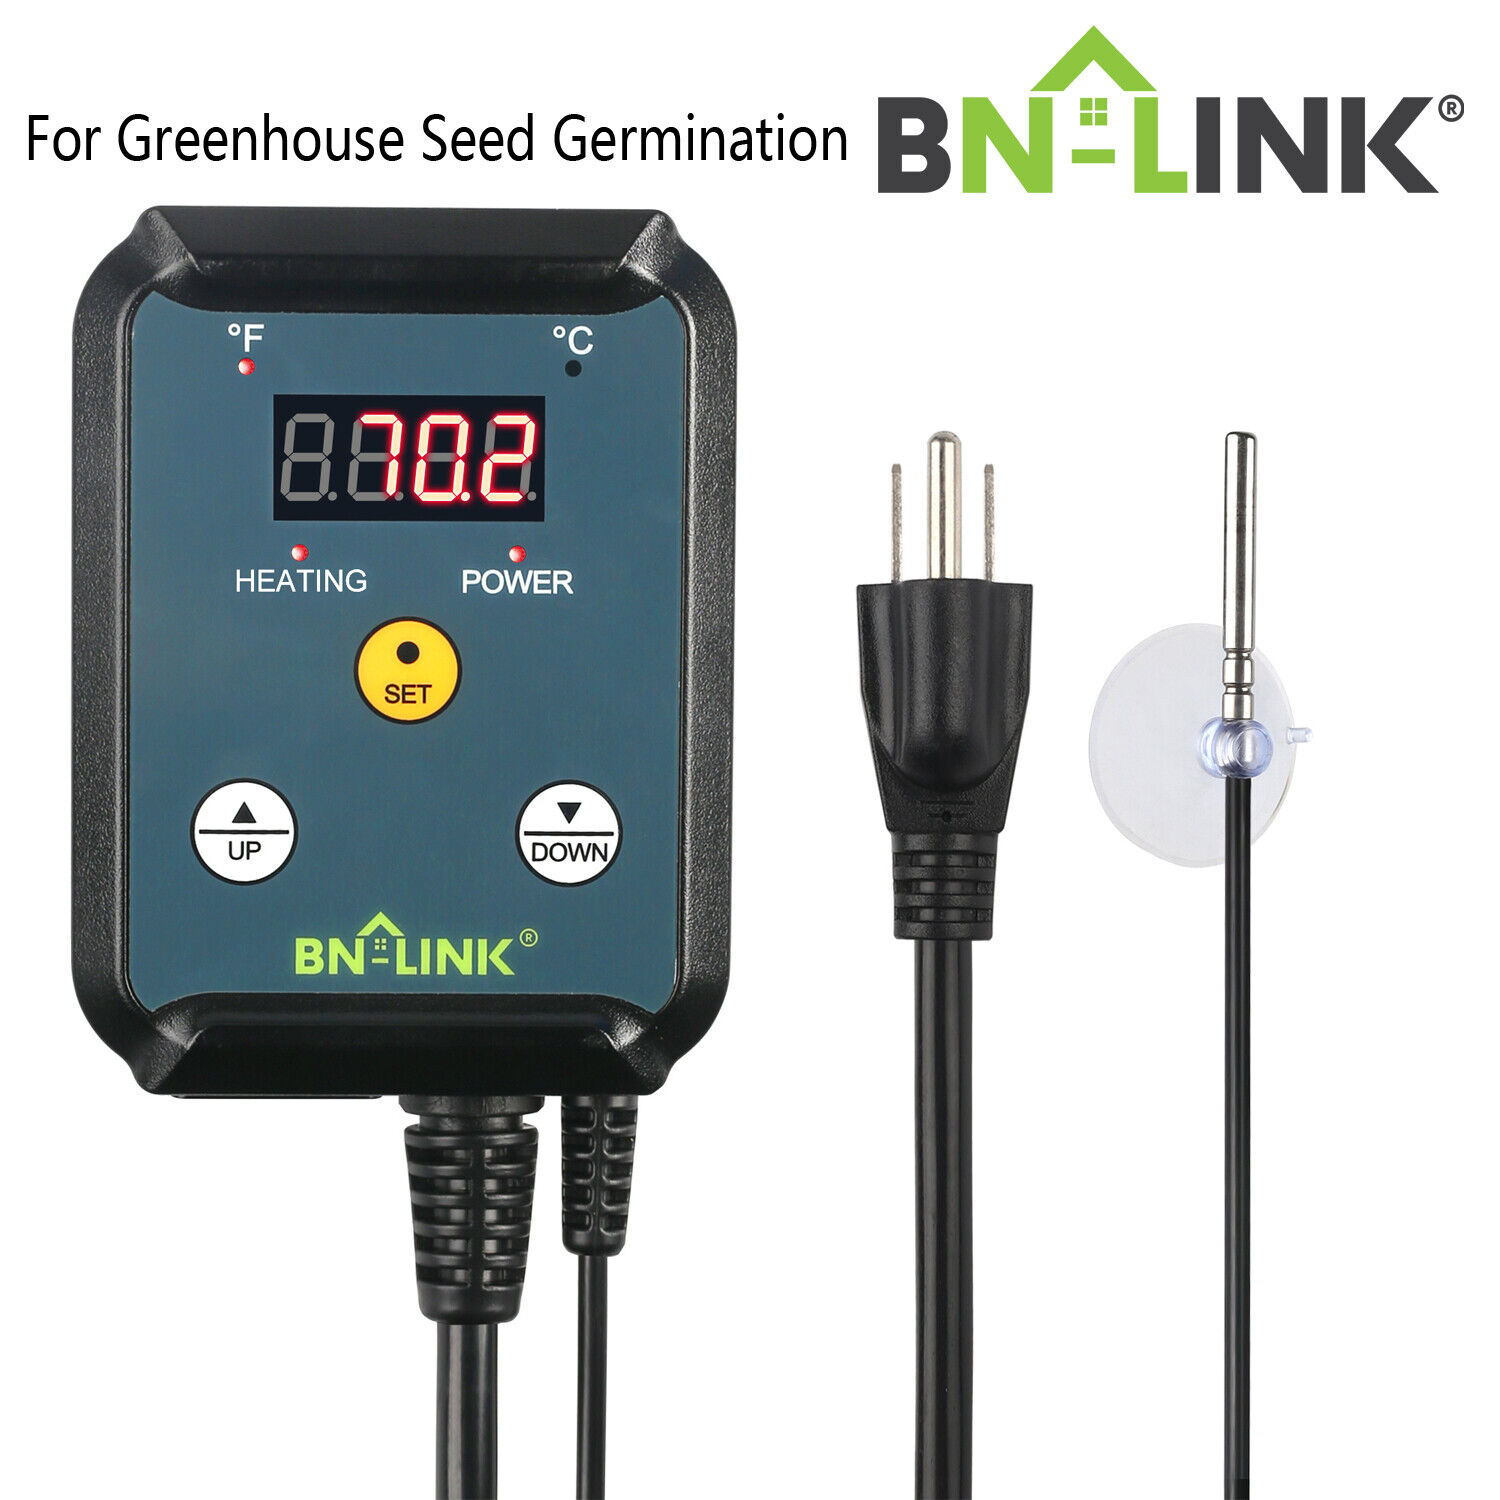 BN-LINK Digital Heat Mat Thermostat Controller For Greenhouse Seed Germination